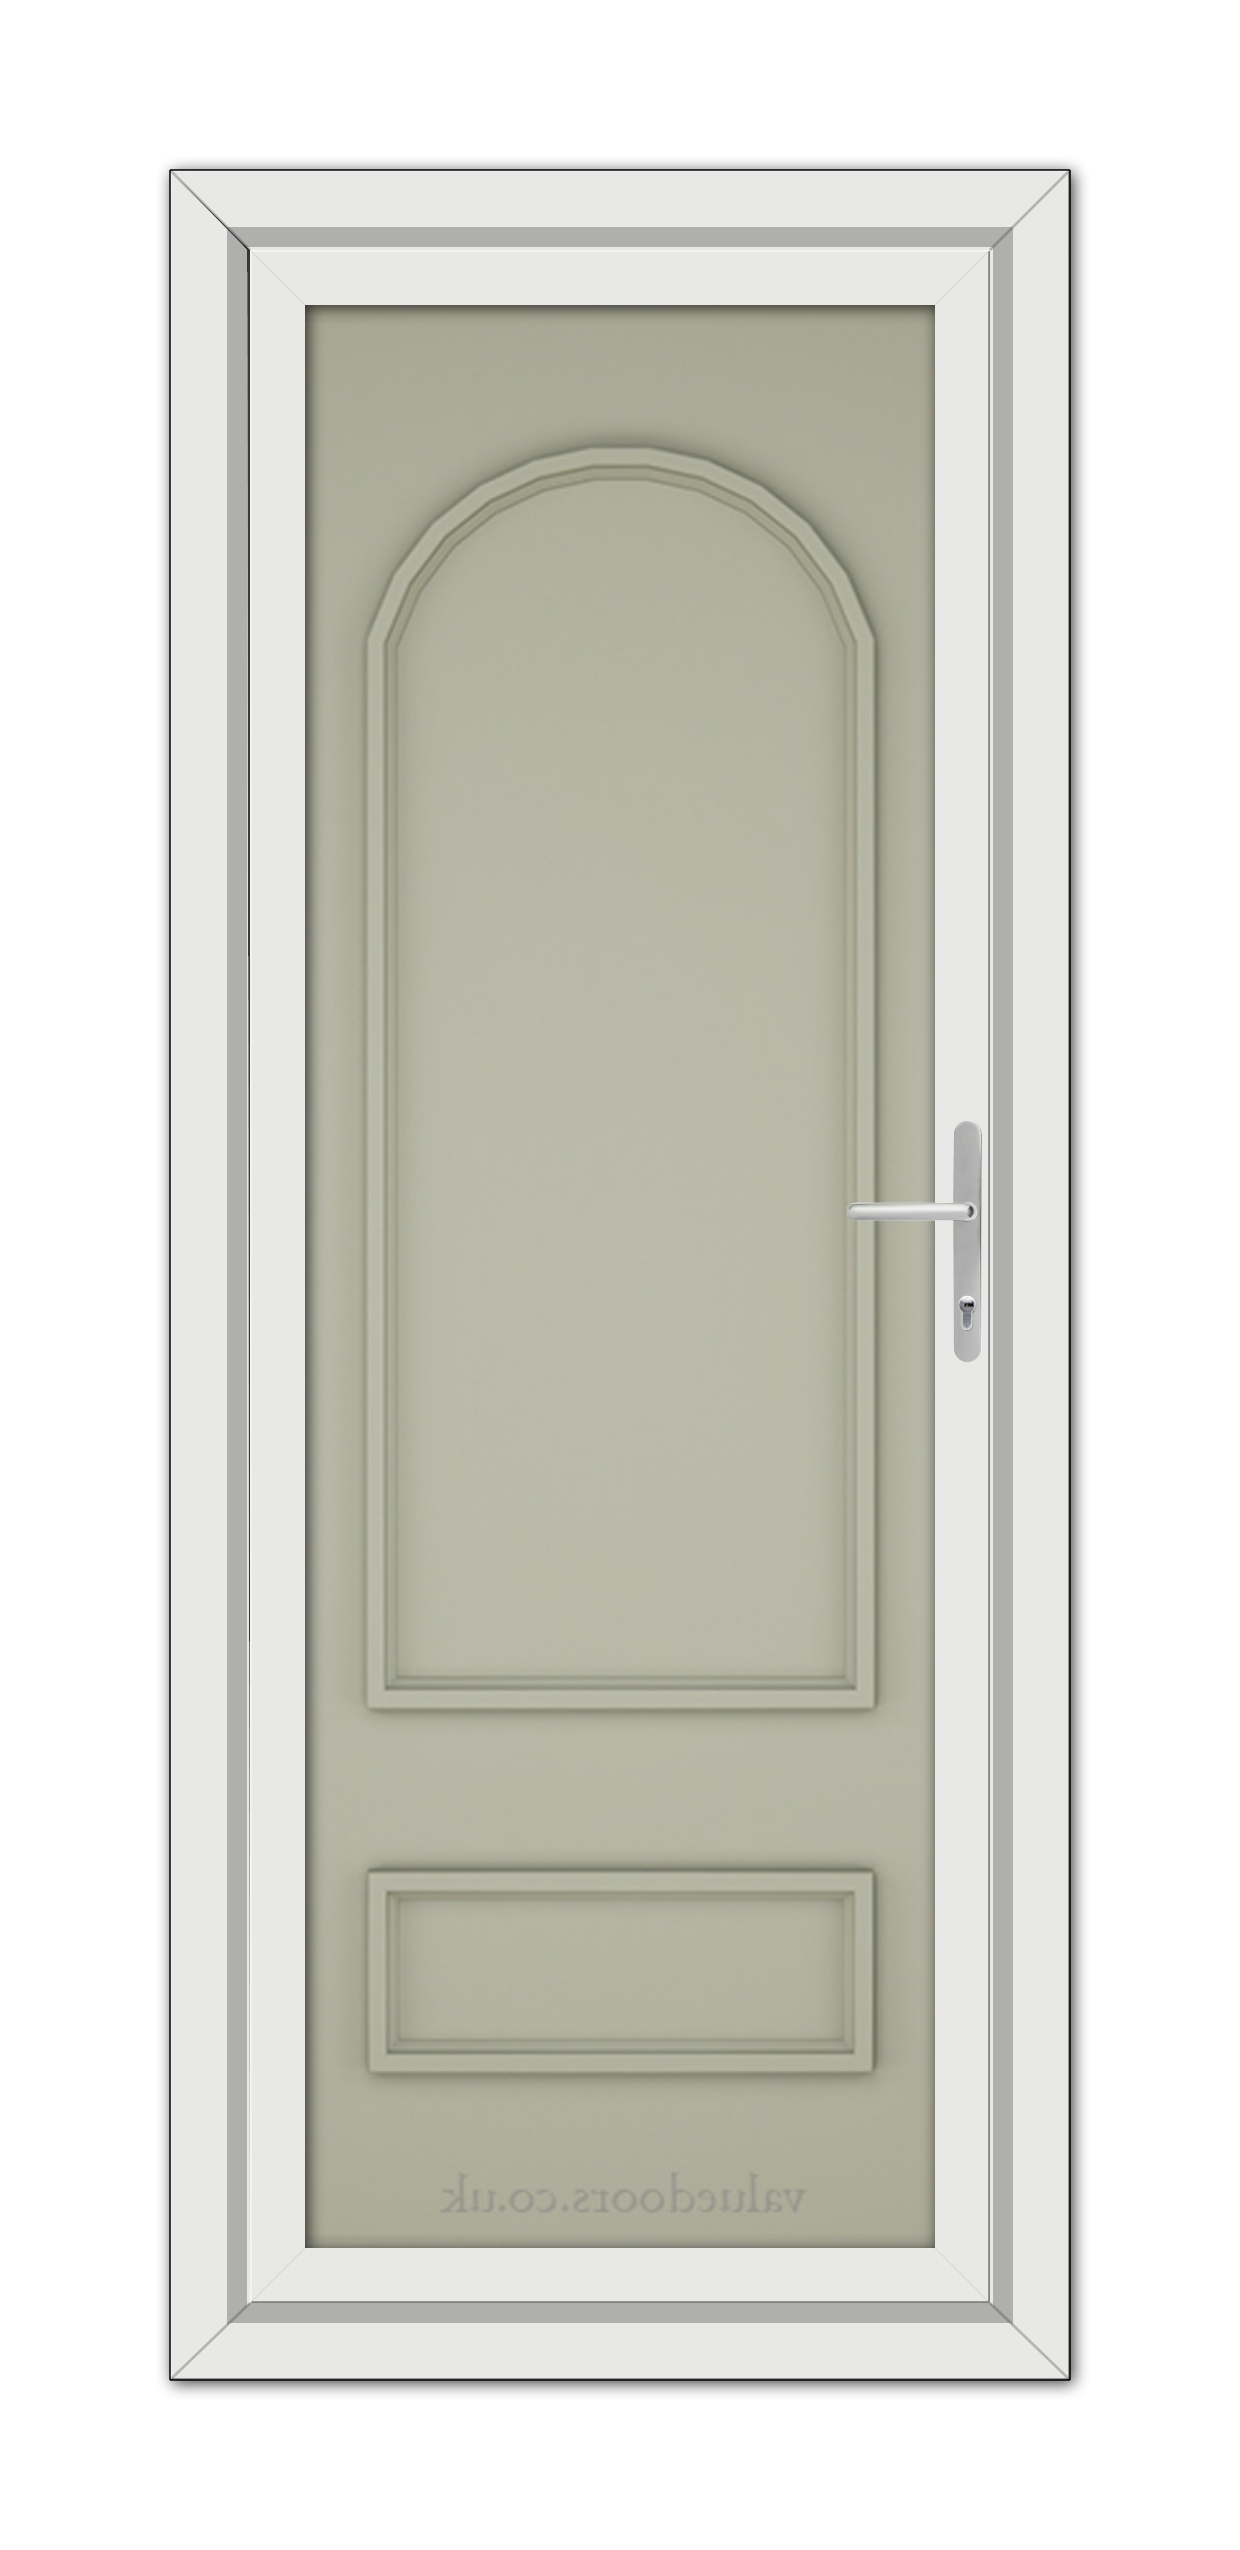 A Agate Grey Canterbury Solid uPVC Door with a silver handle, set within a white door frame, viewed from the front.